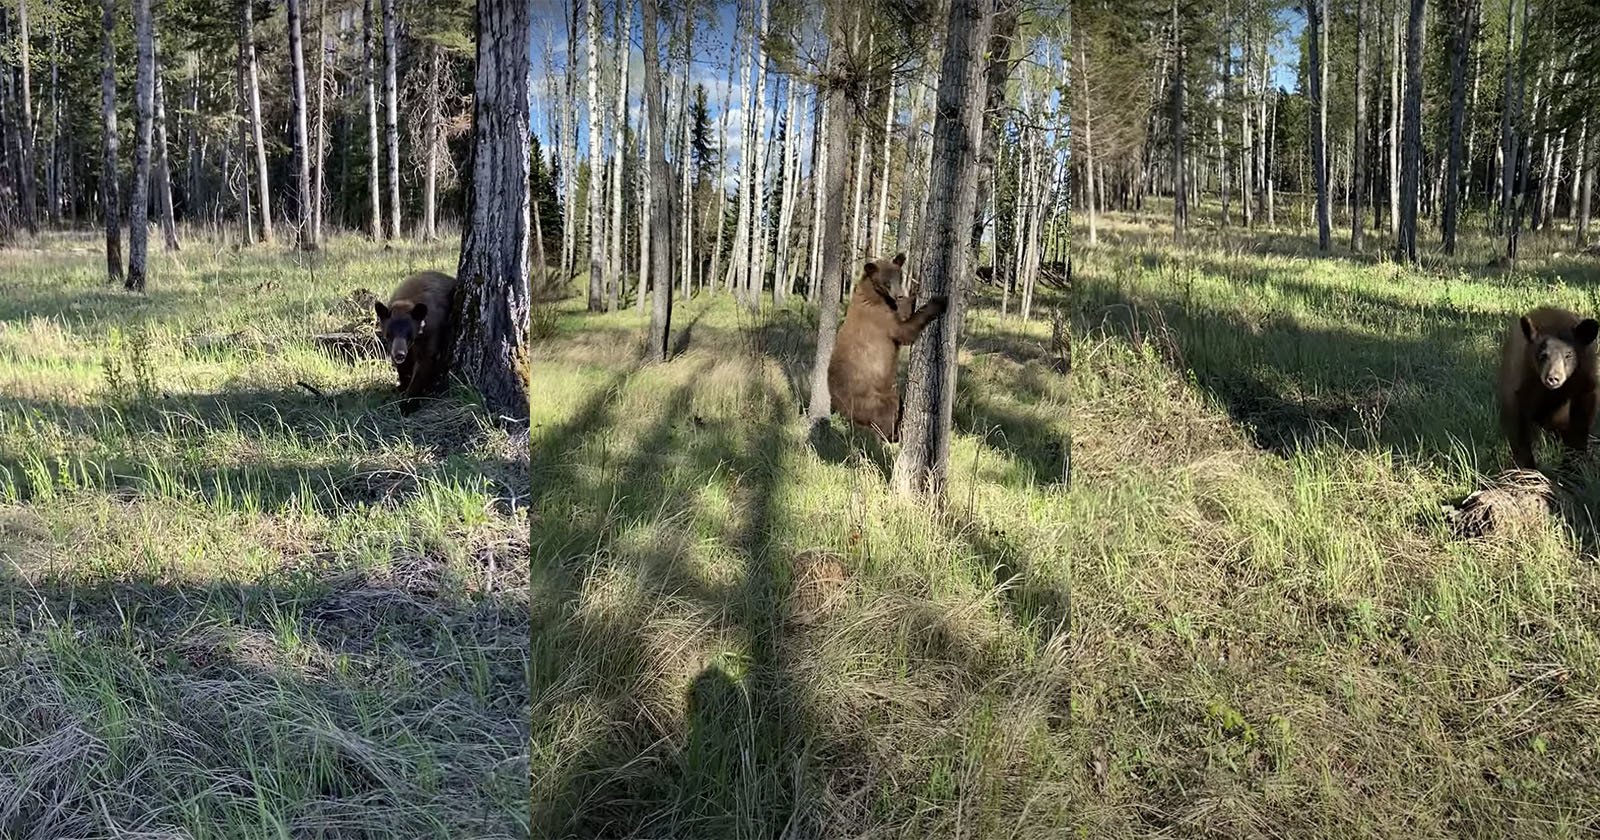 Photographer Records a Scary Encounter with a Bear